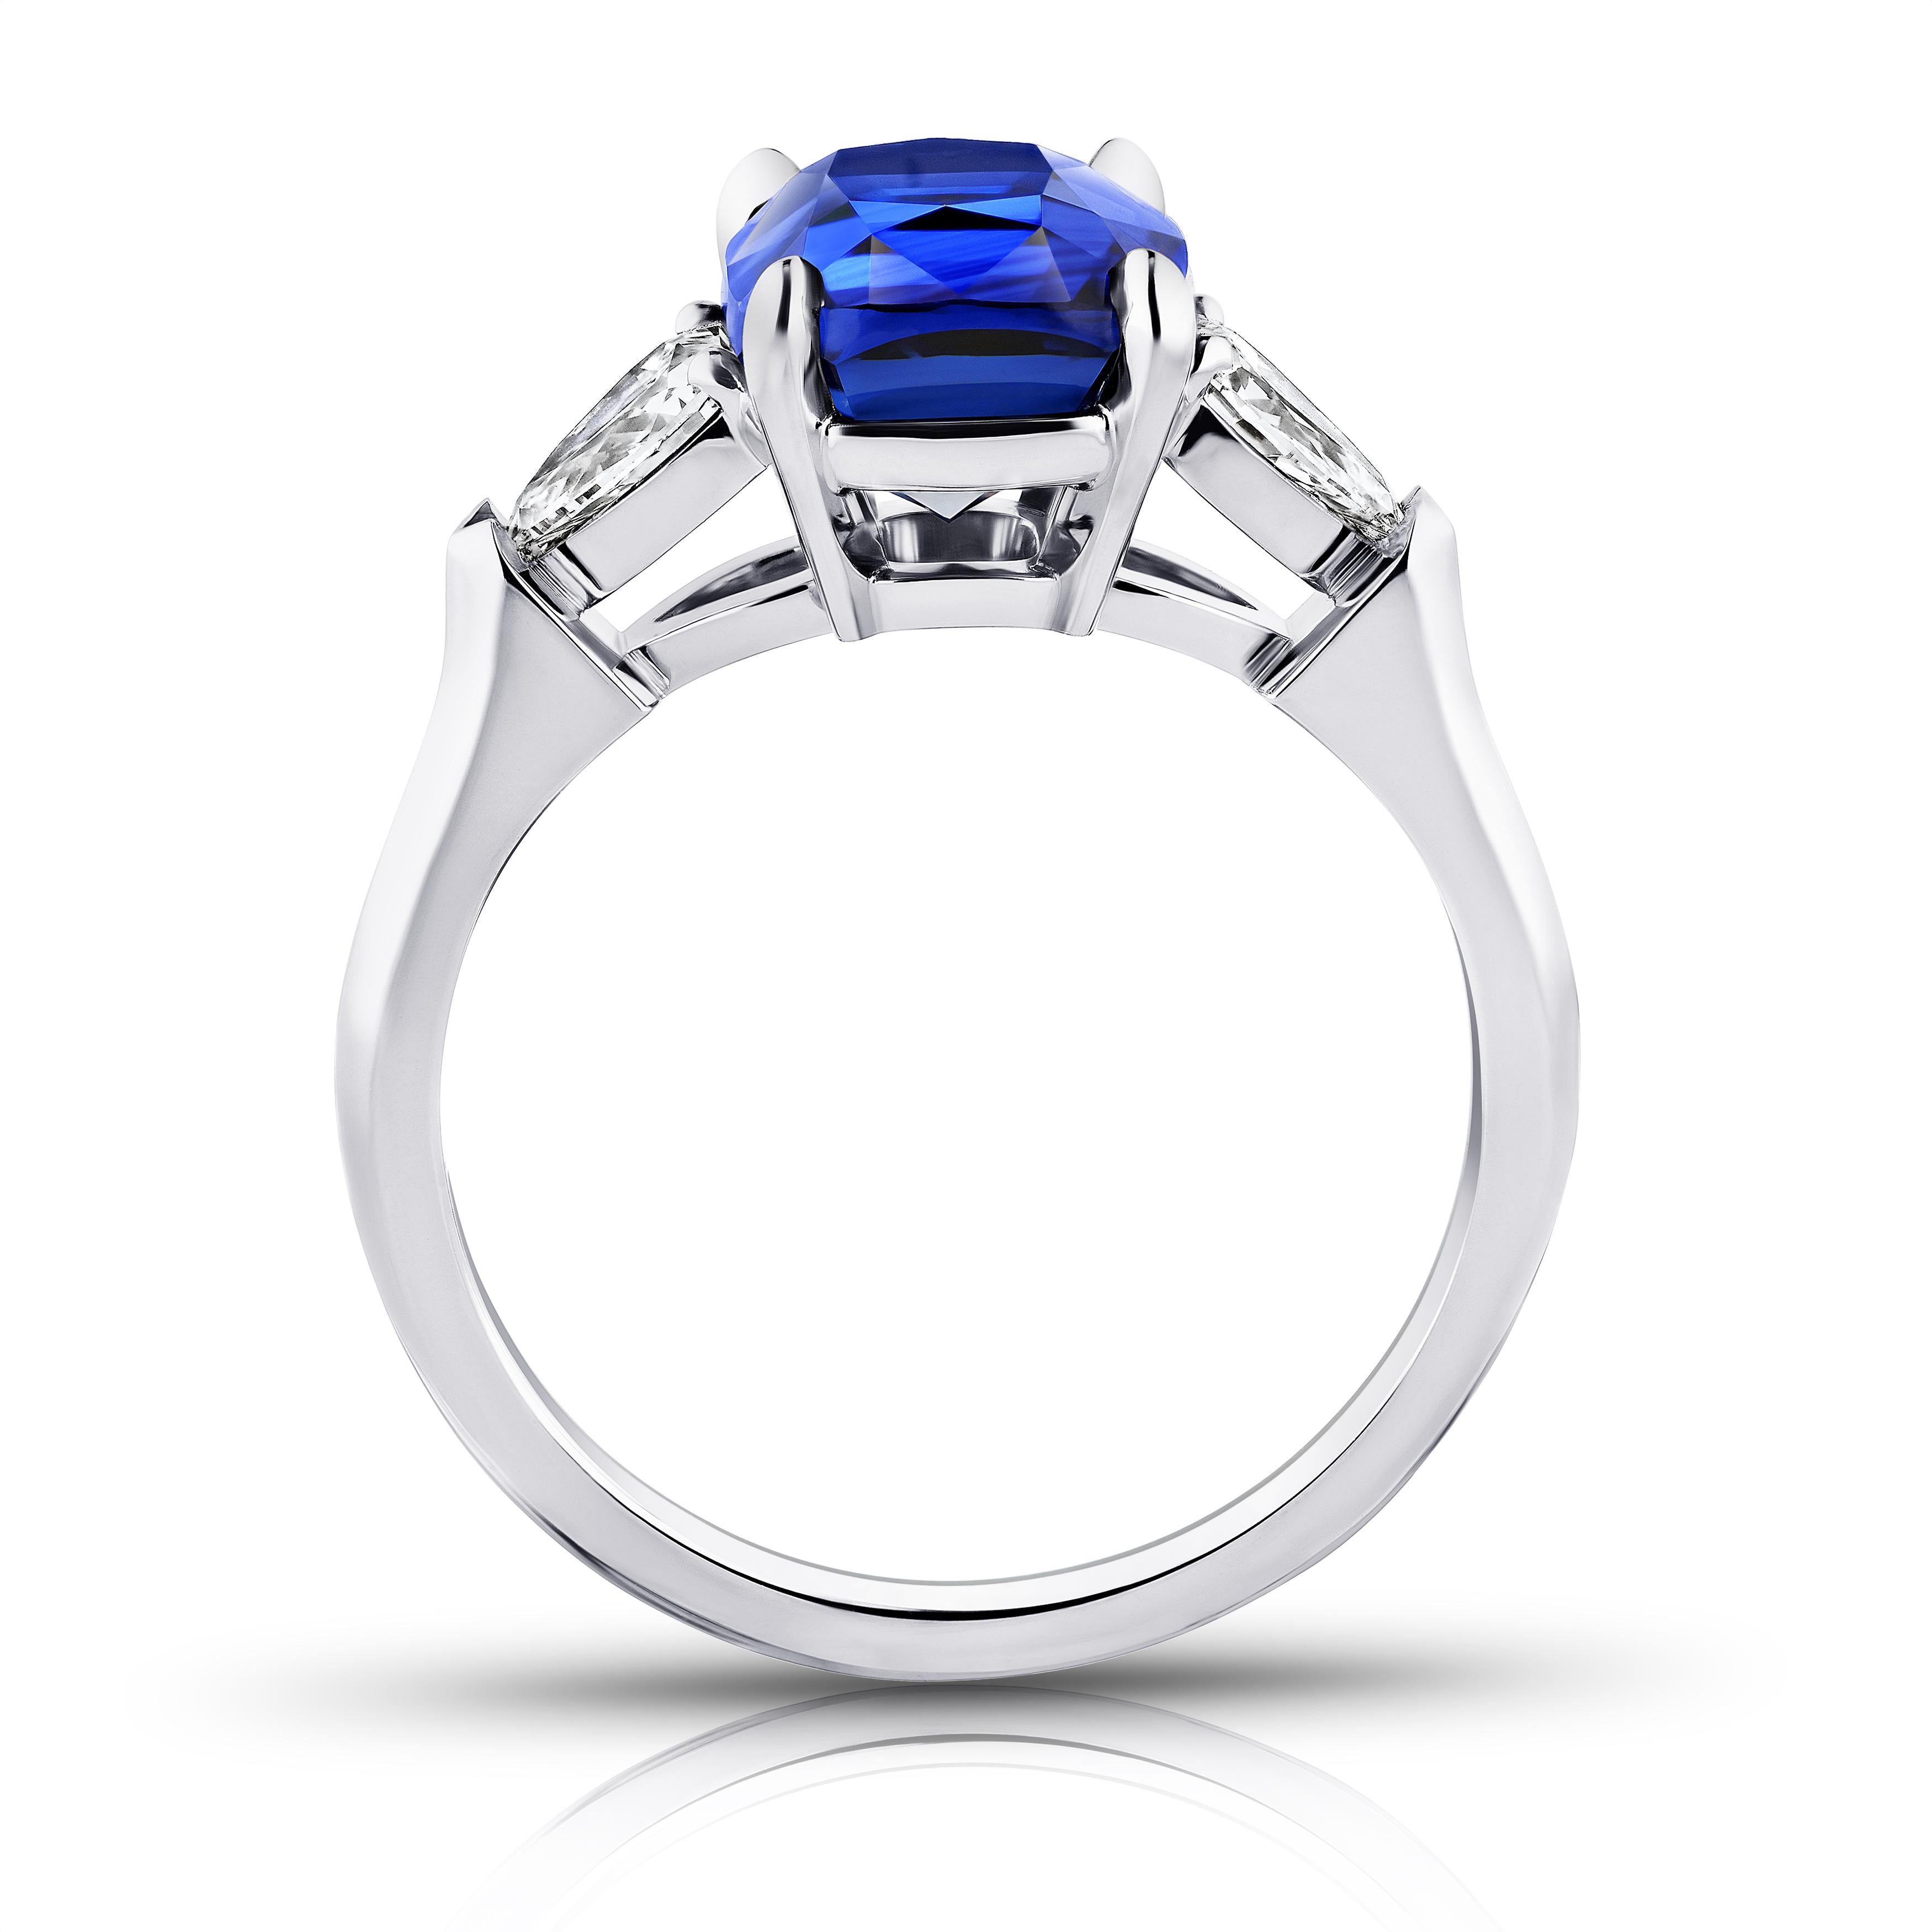 4.04 carat cushion blue sapphire with arrow shape diamonds .51 carats set in a platinum ring. Size 7. Free resizing to your finger size. 